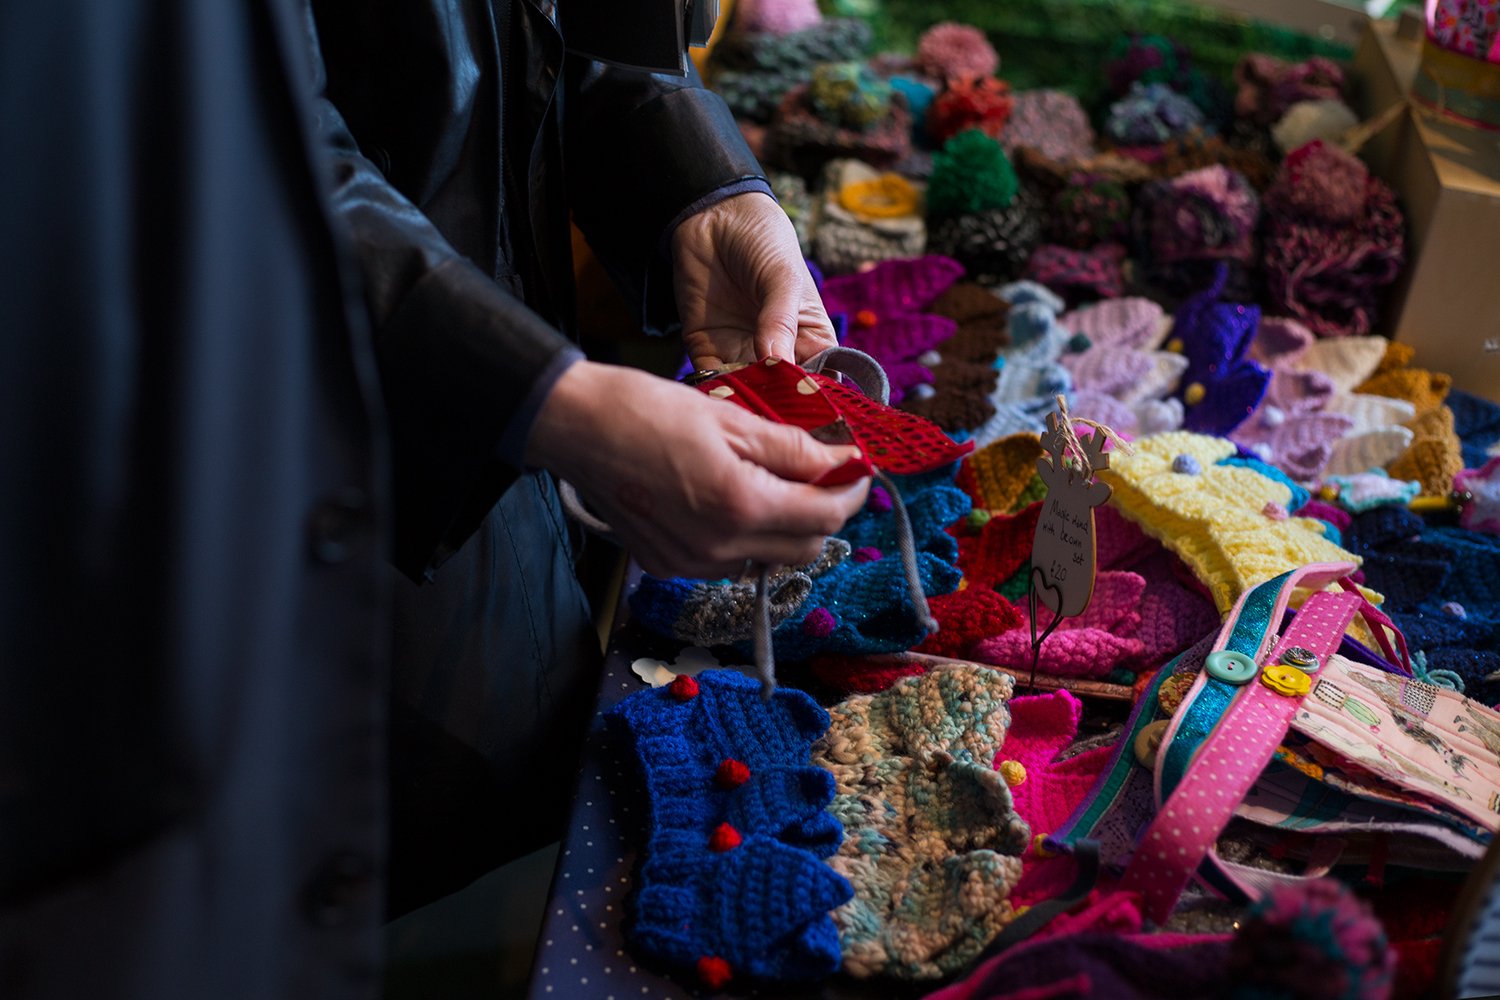 Crochet items on display at Makers Market at Summerhall